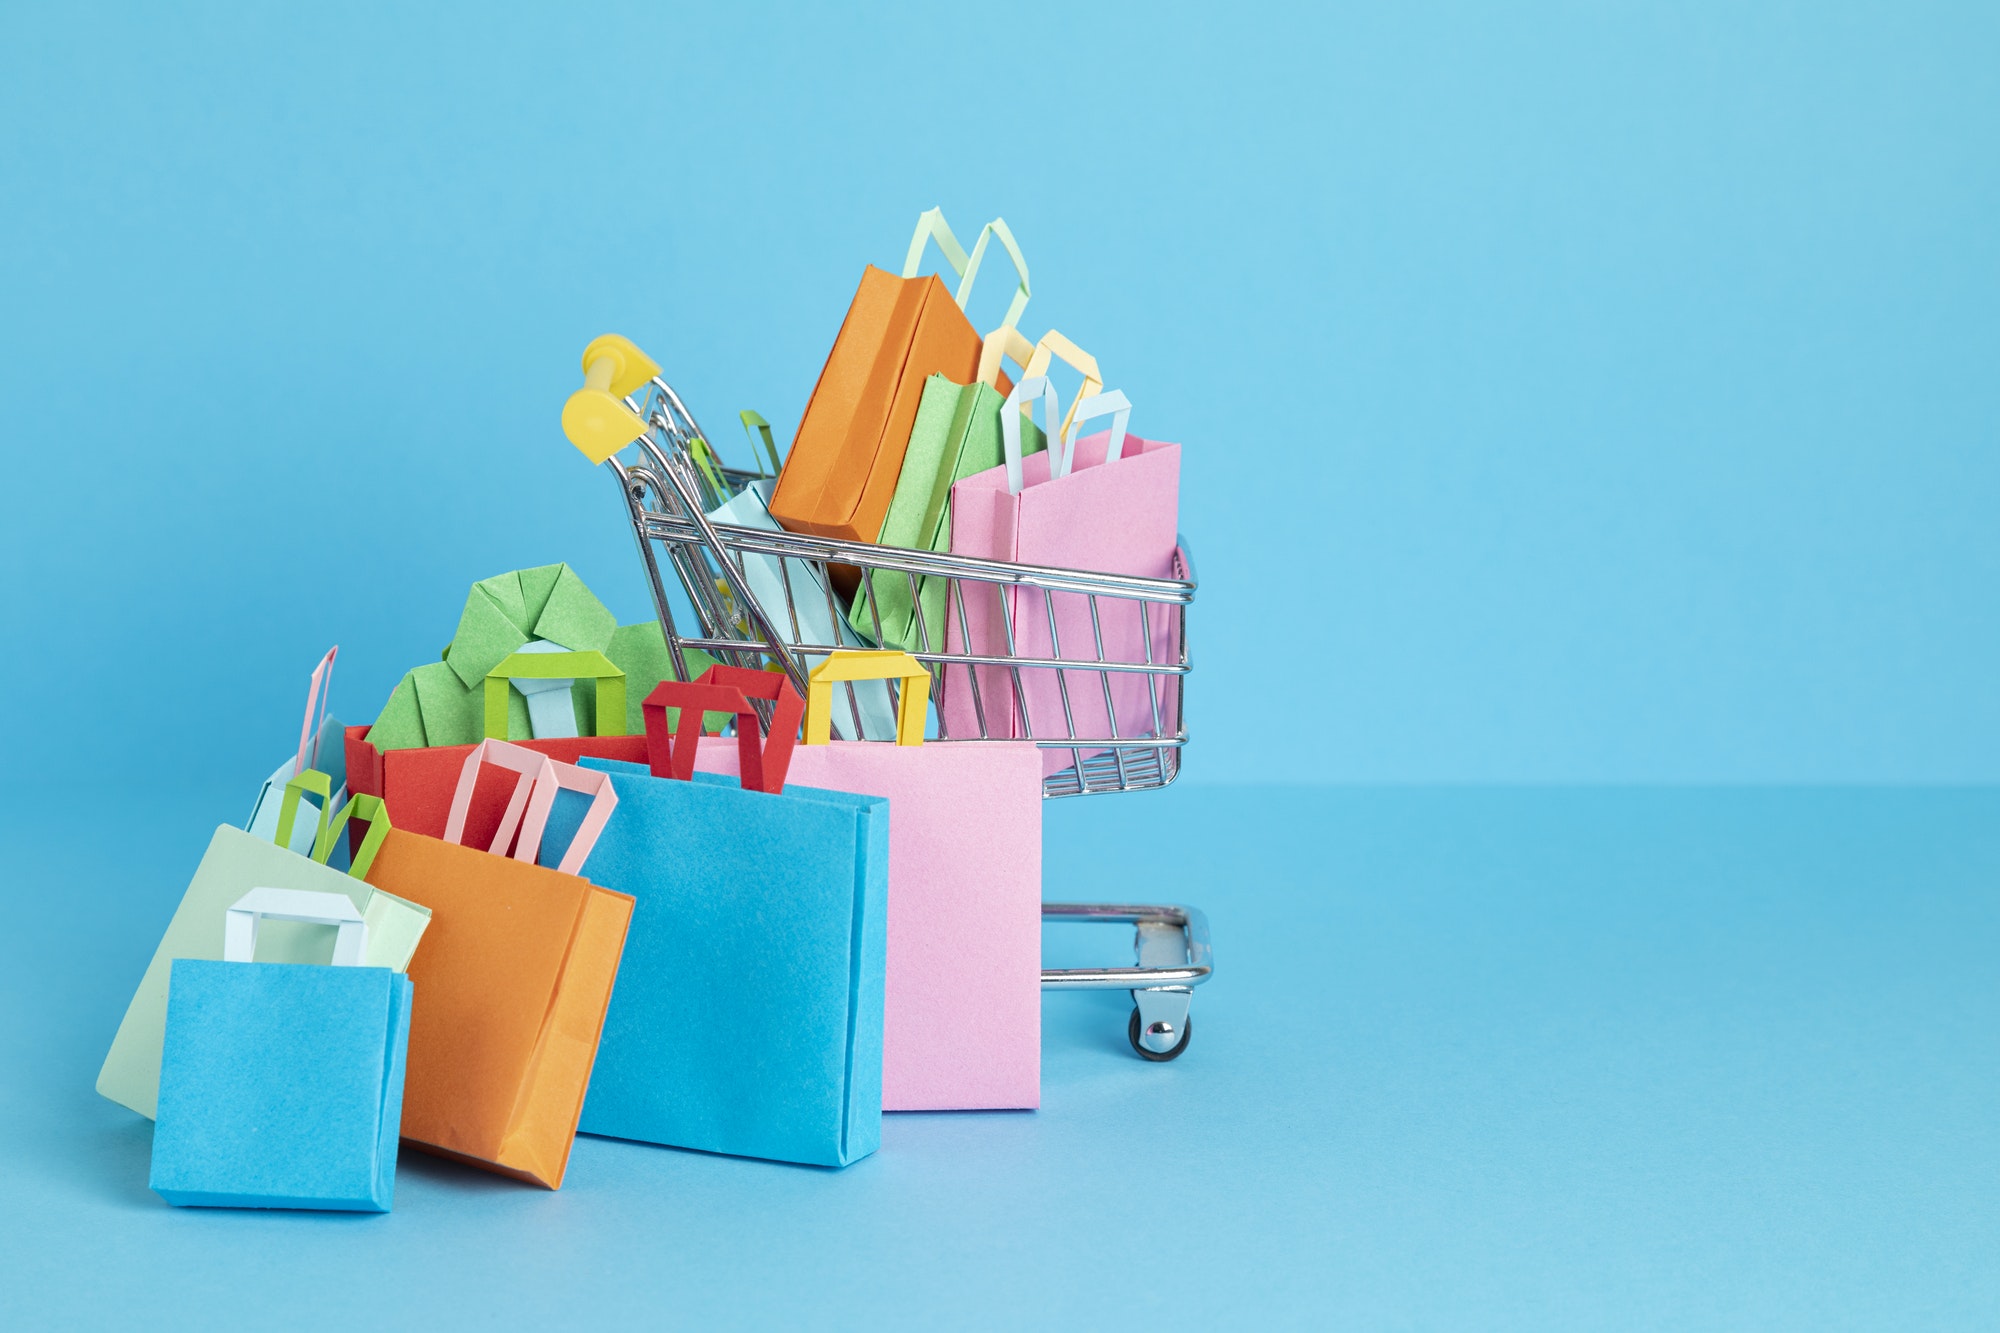 Shopping basket full of paper bags. Sesonal sale, online deals, discounts, promotions idea